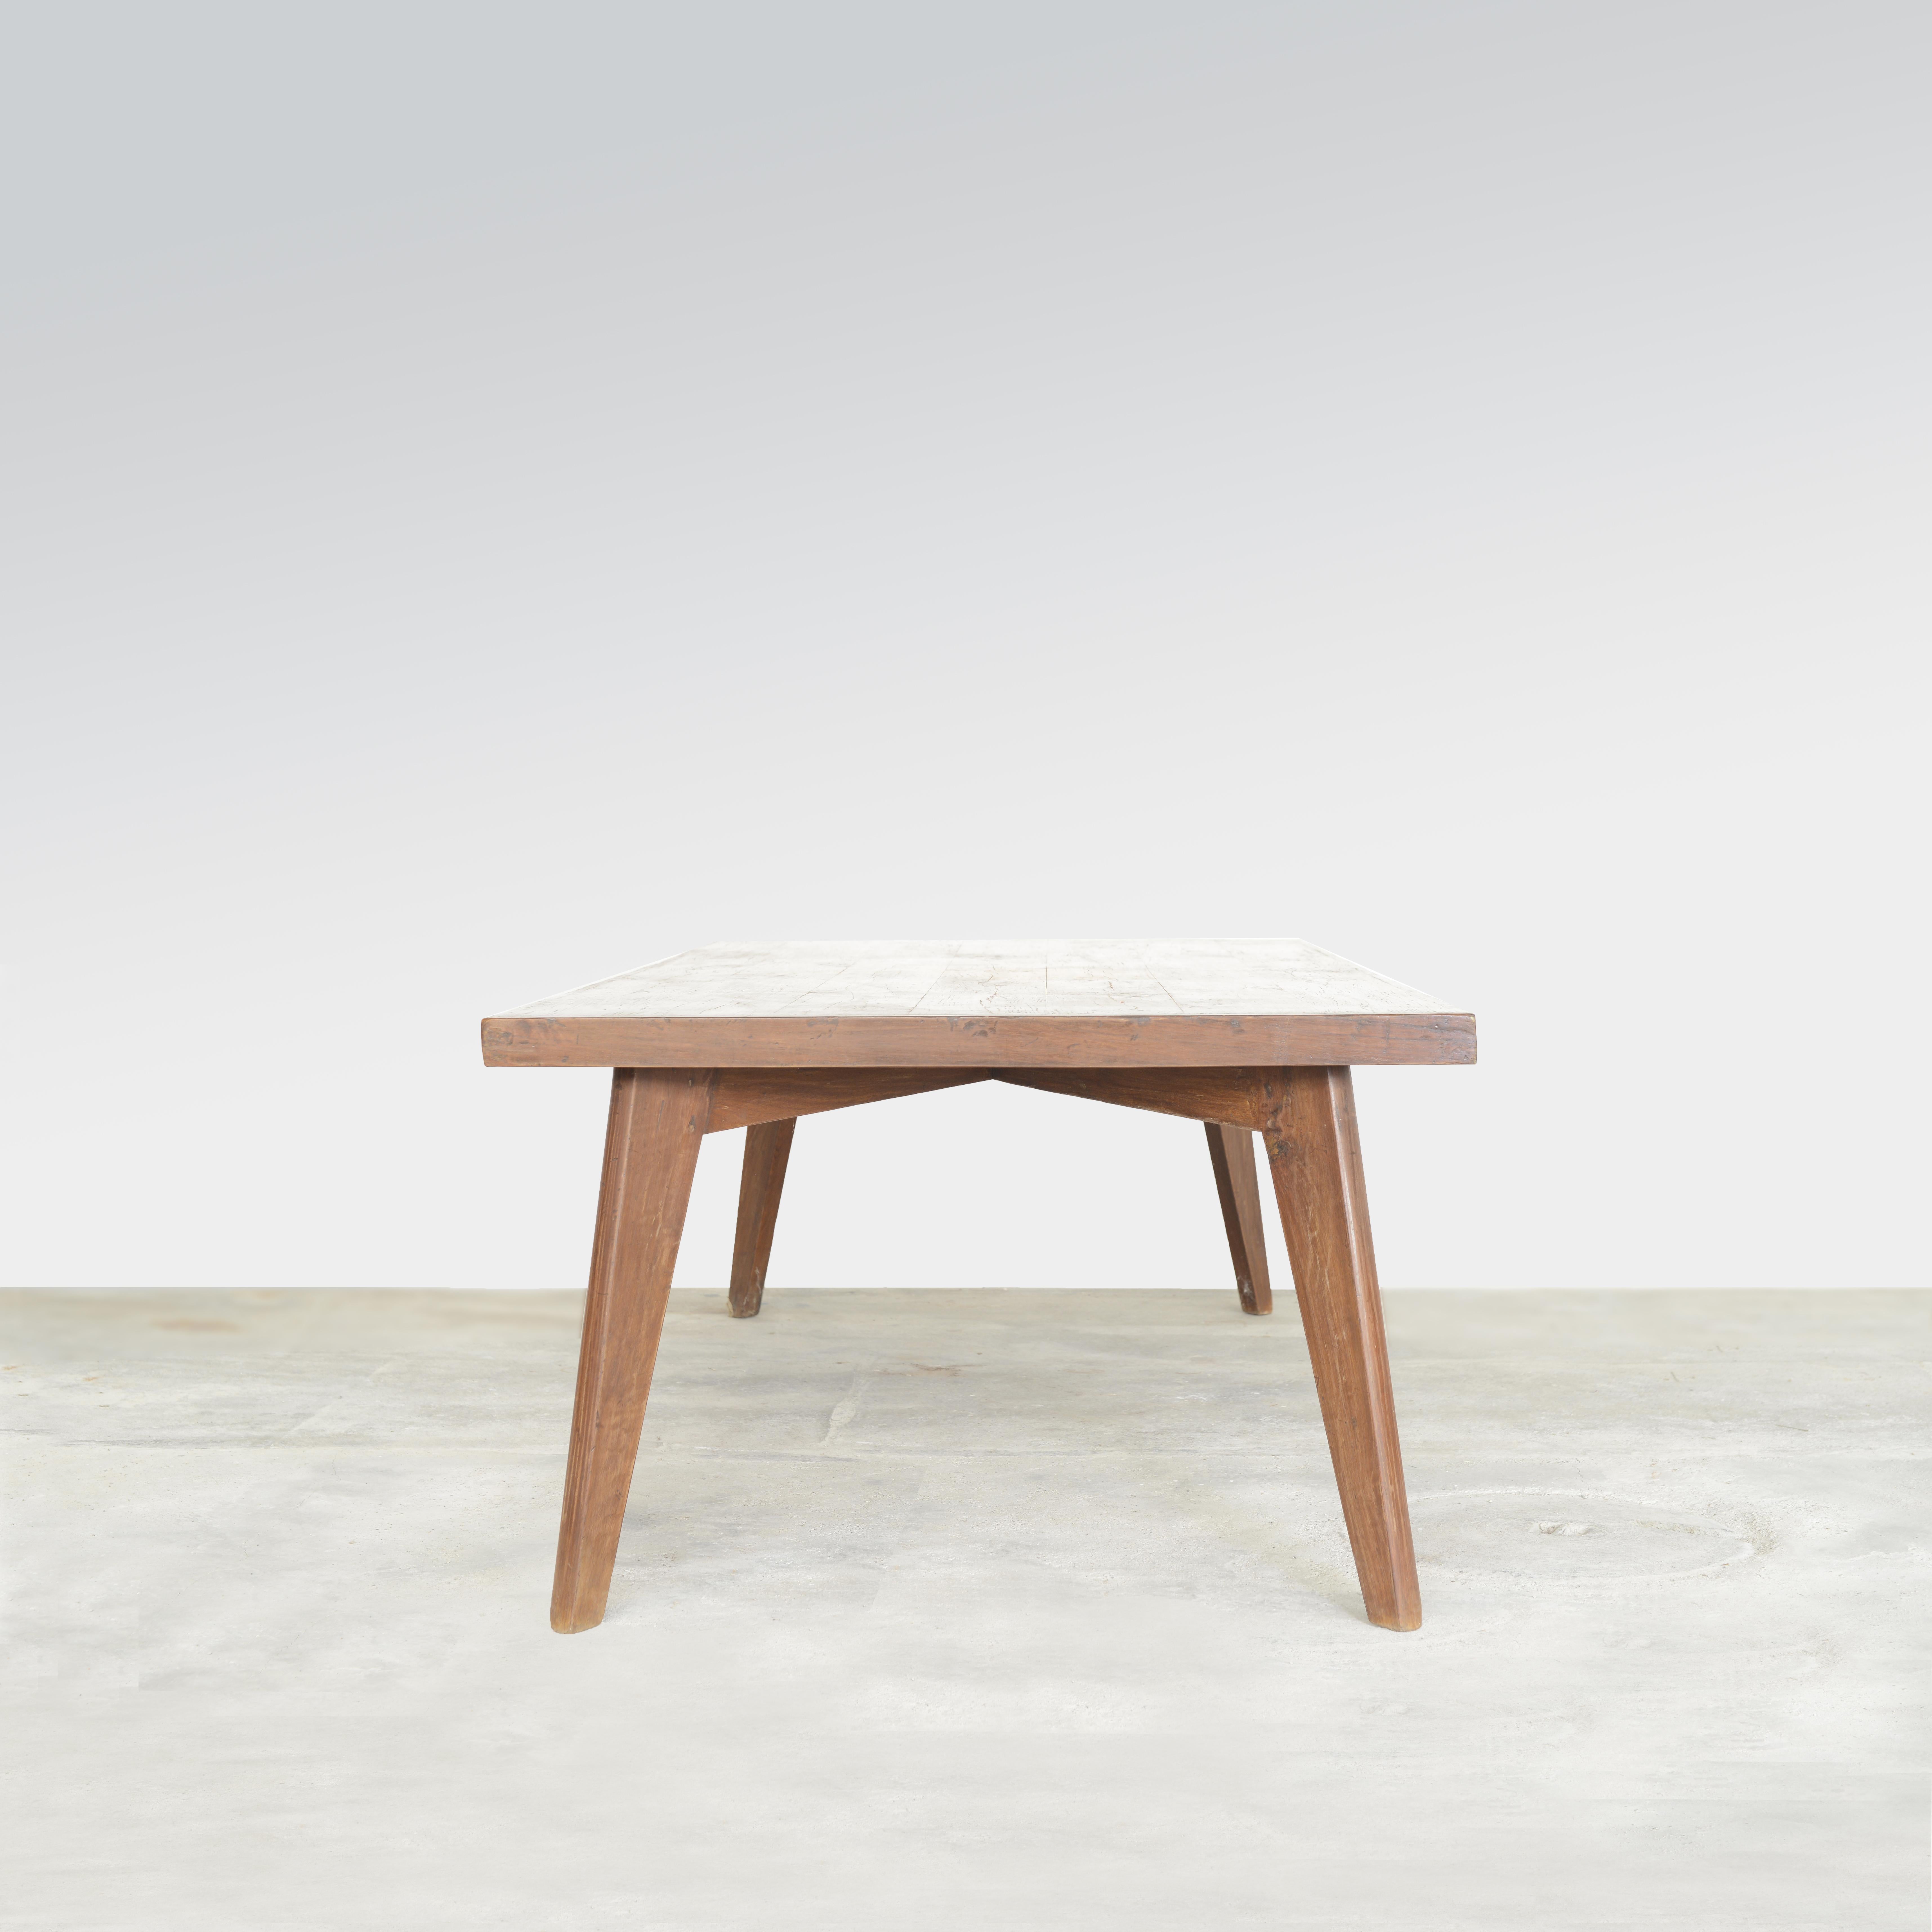 This table is not only a fantastic piece, it’s a design icon. It is raw in its simplicity, embodying an expressing the pure ideas. There is something deeply touching about this design and at the same time it’s very sharp and fierce. It is limited to